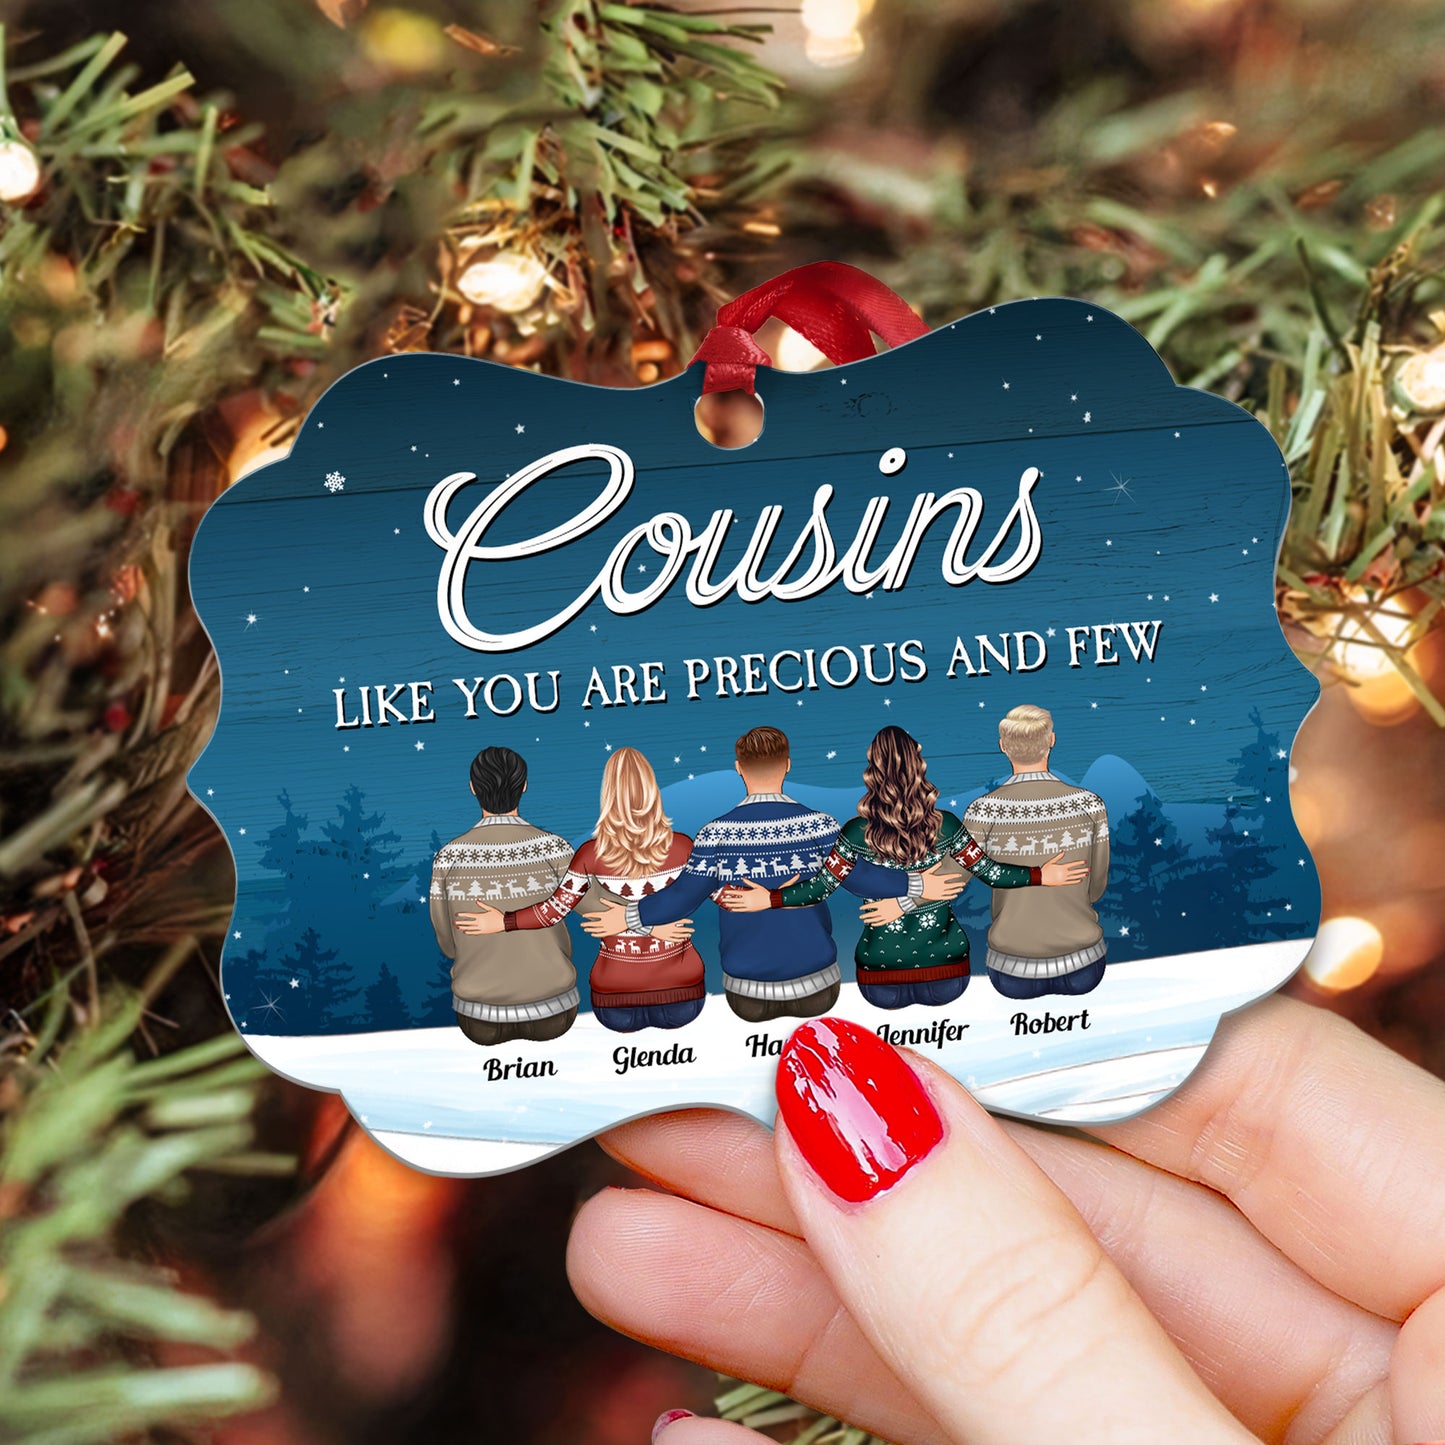 Cousins Like You Are Precious And Few - Personalized Aluminum Ornament - Christmas Gift For Cousins, Gift For Aunts, Gift For Uncles, Gift For Family - Family Hugging